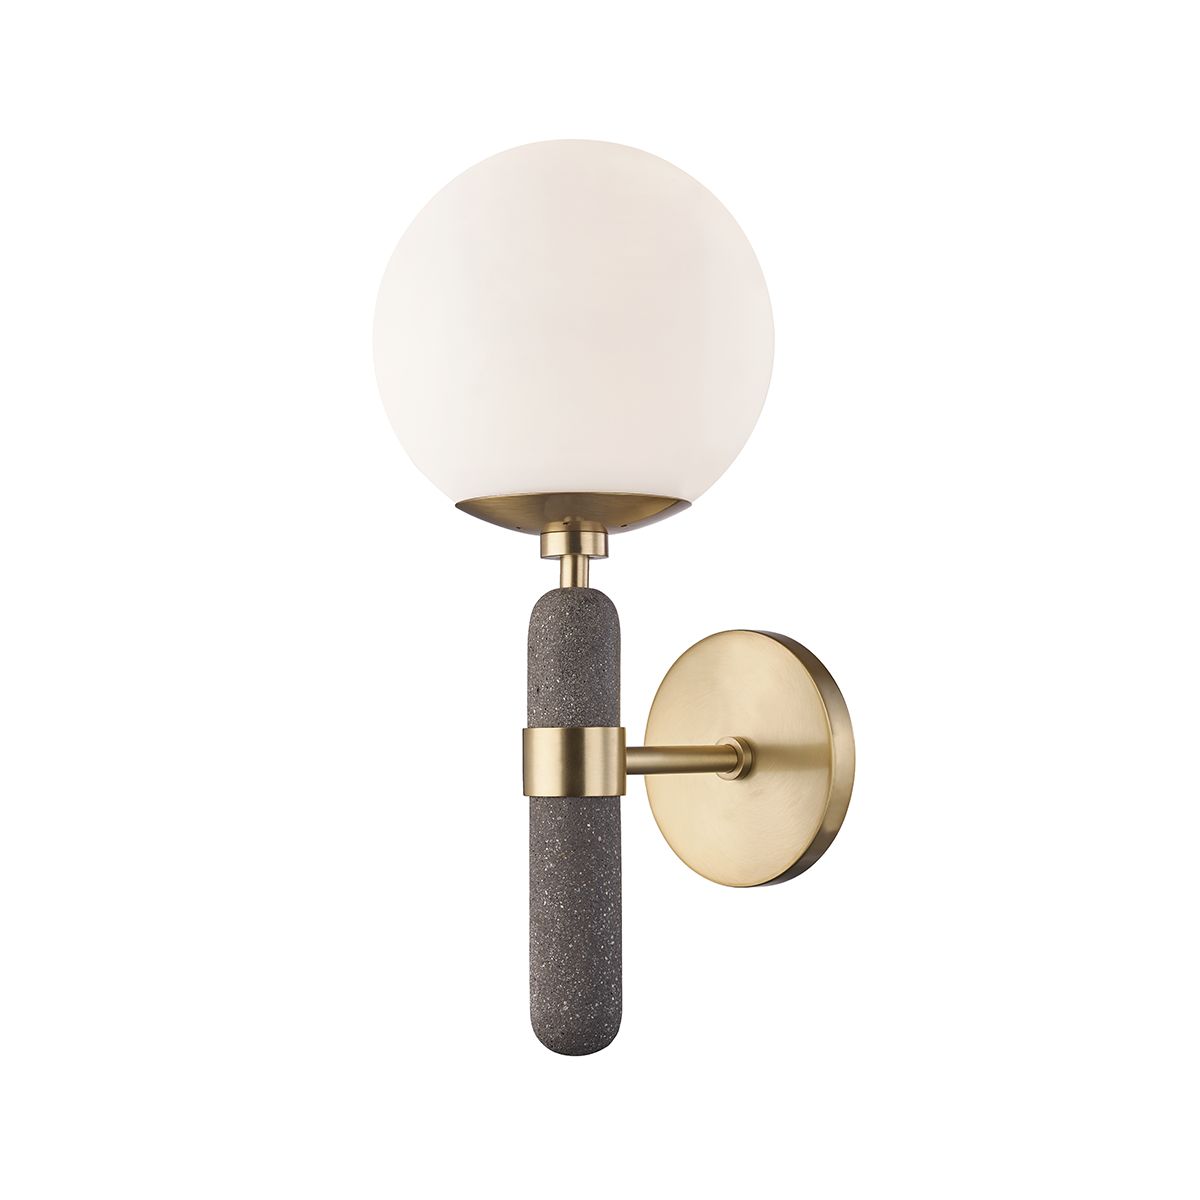 Brielle 16 in. Armed Sconce